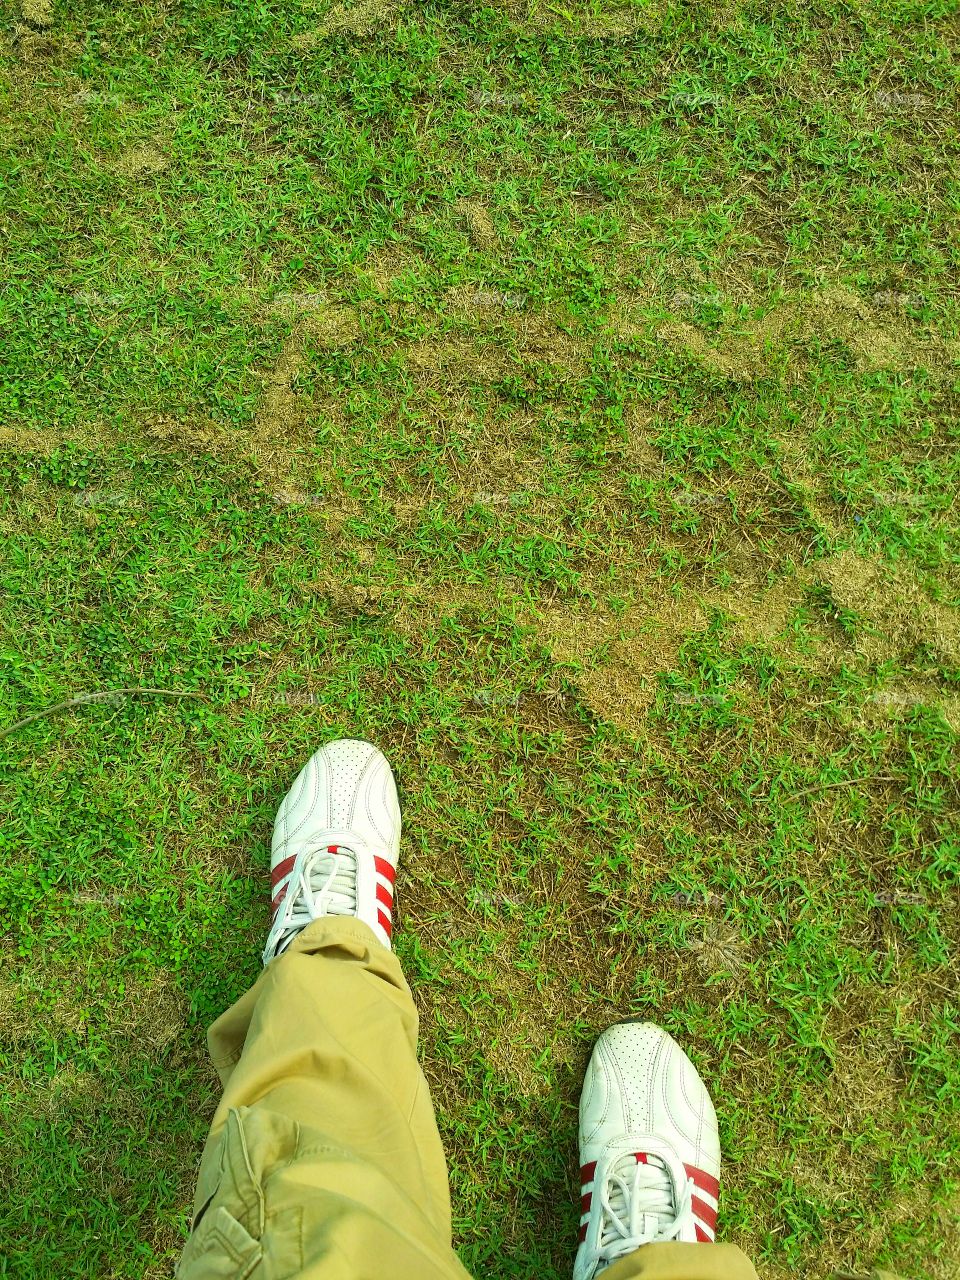 To stand out on the green grass soft and refreshing.